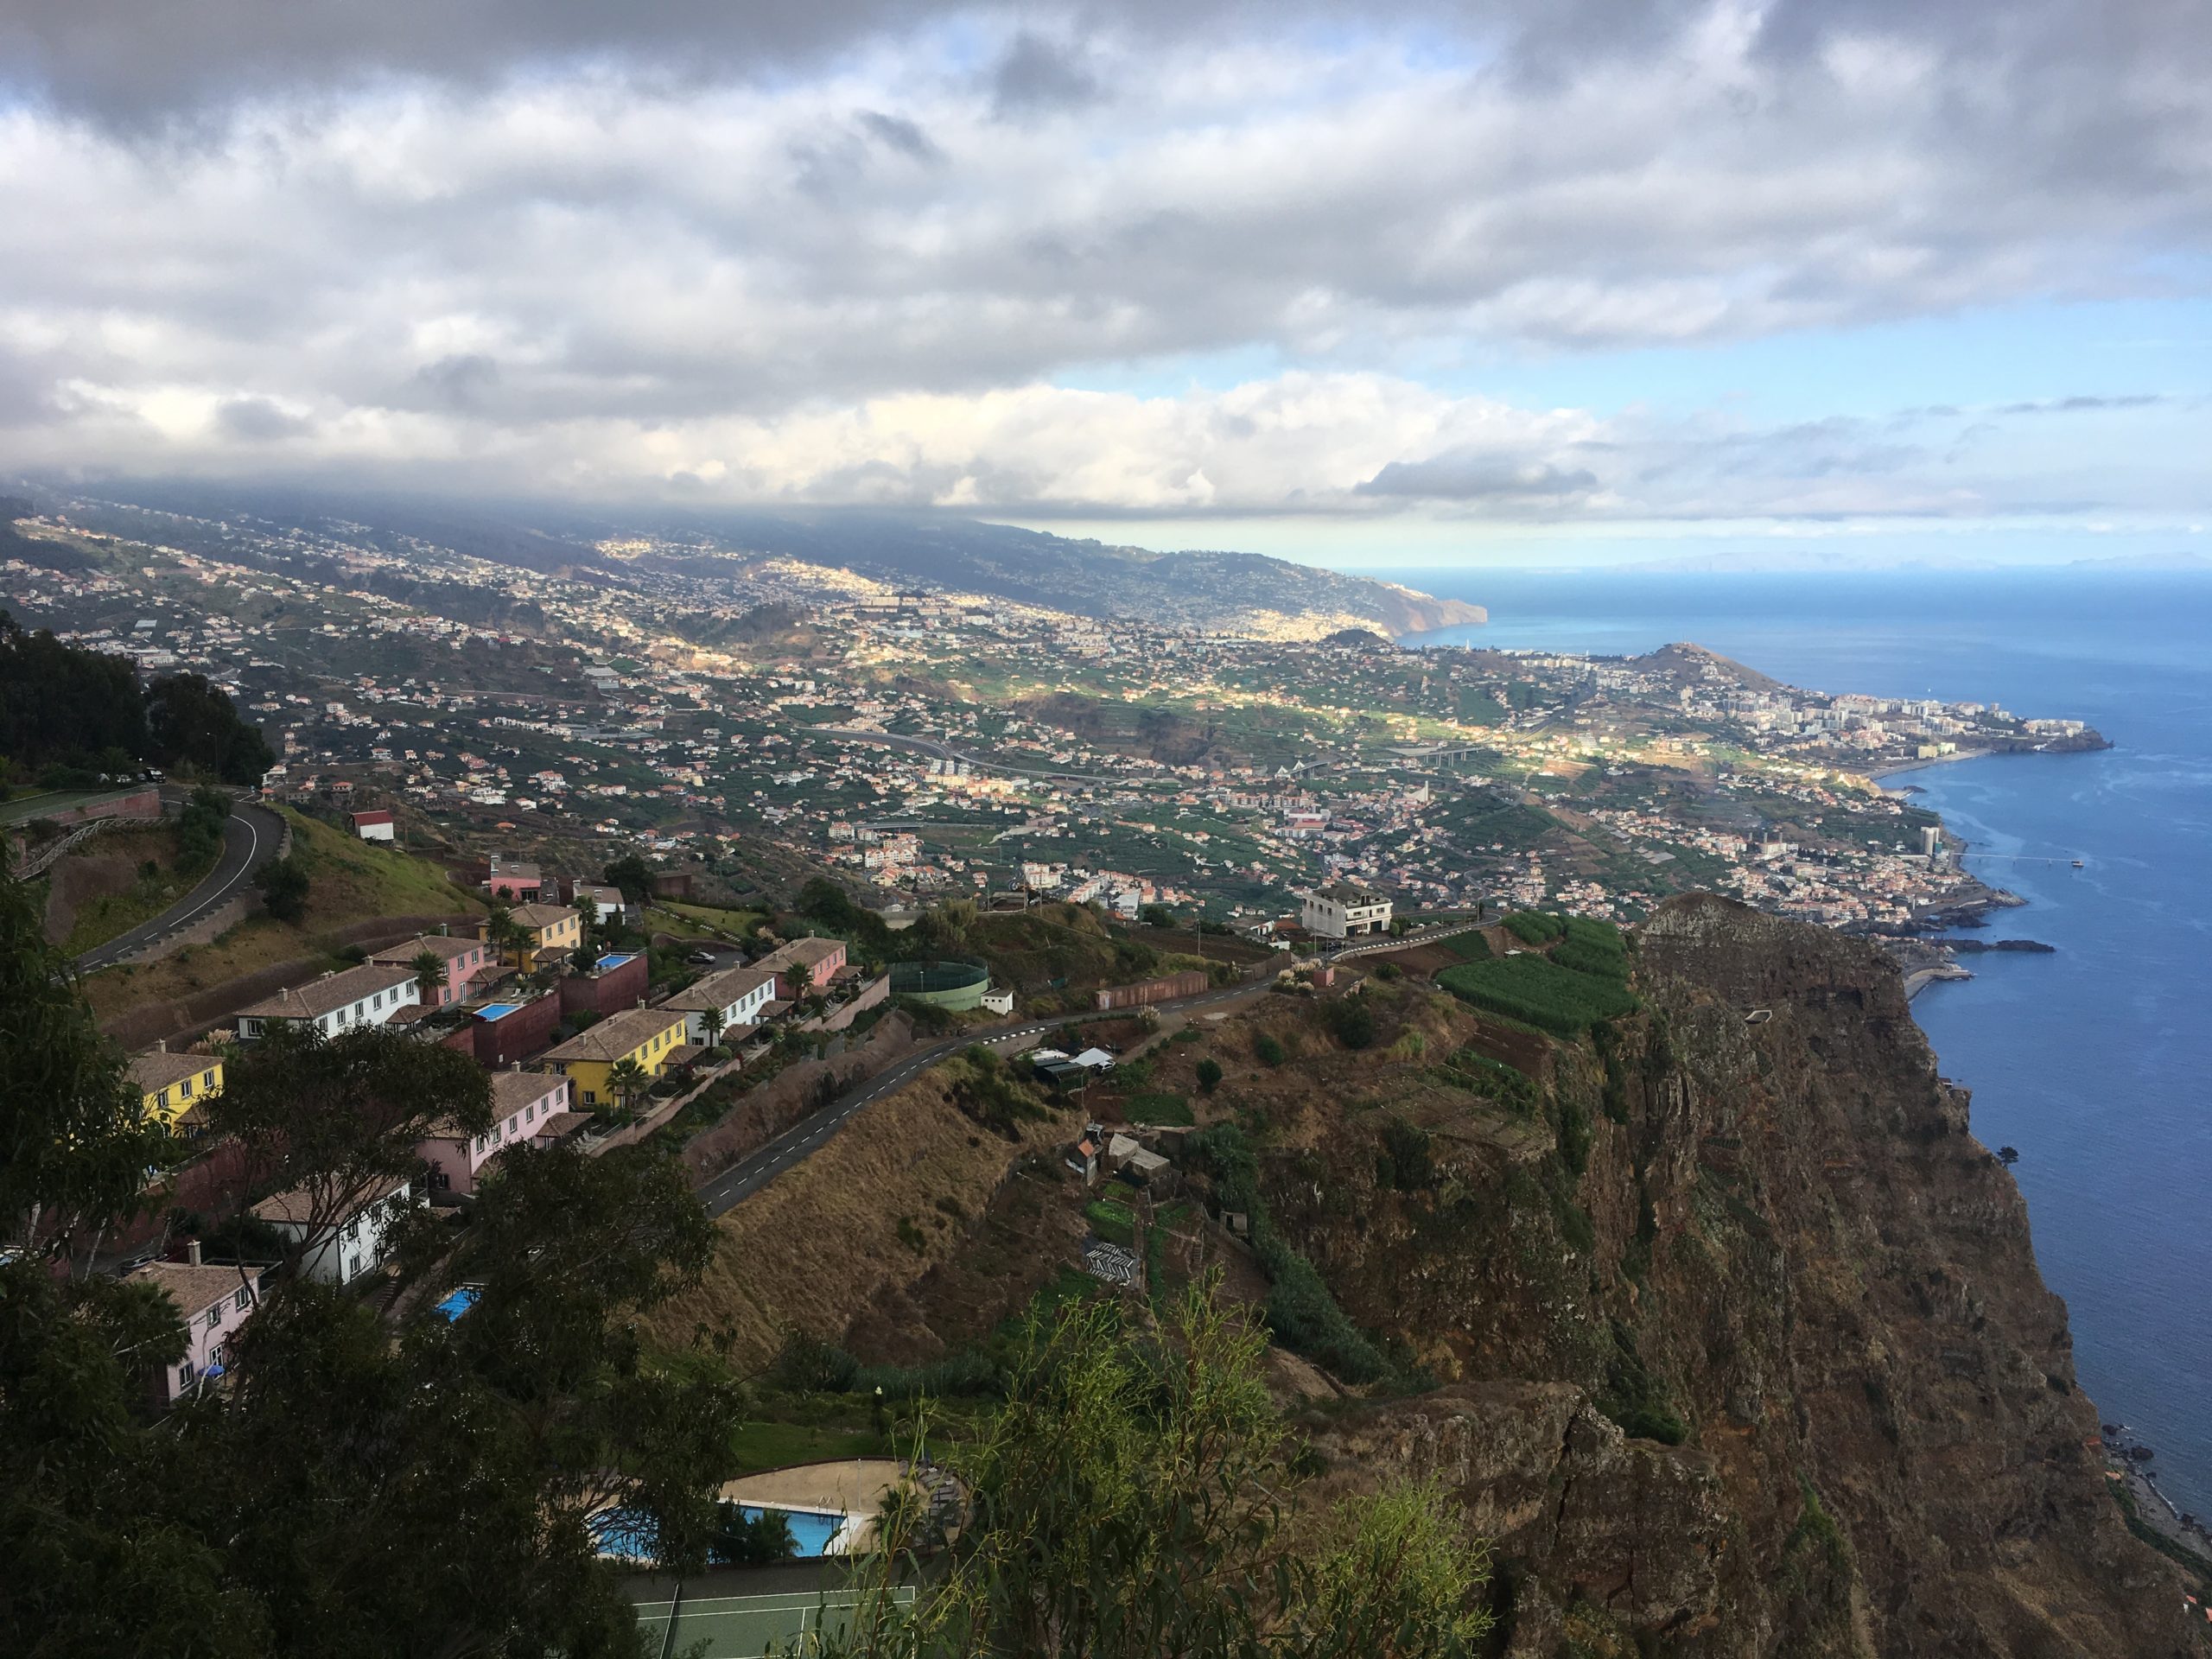 View of Funchal on Madeira Island from Cabo Girao